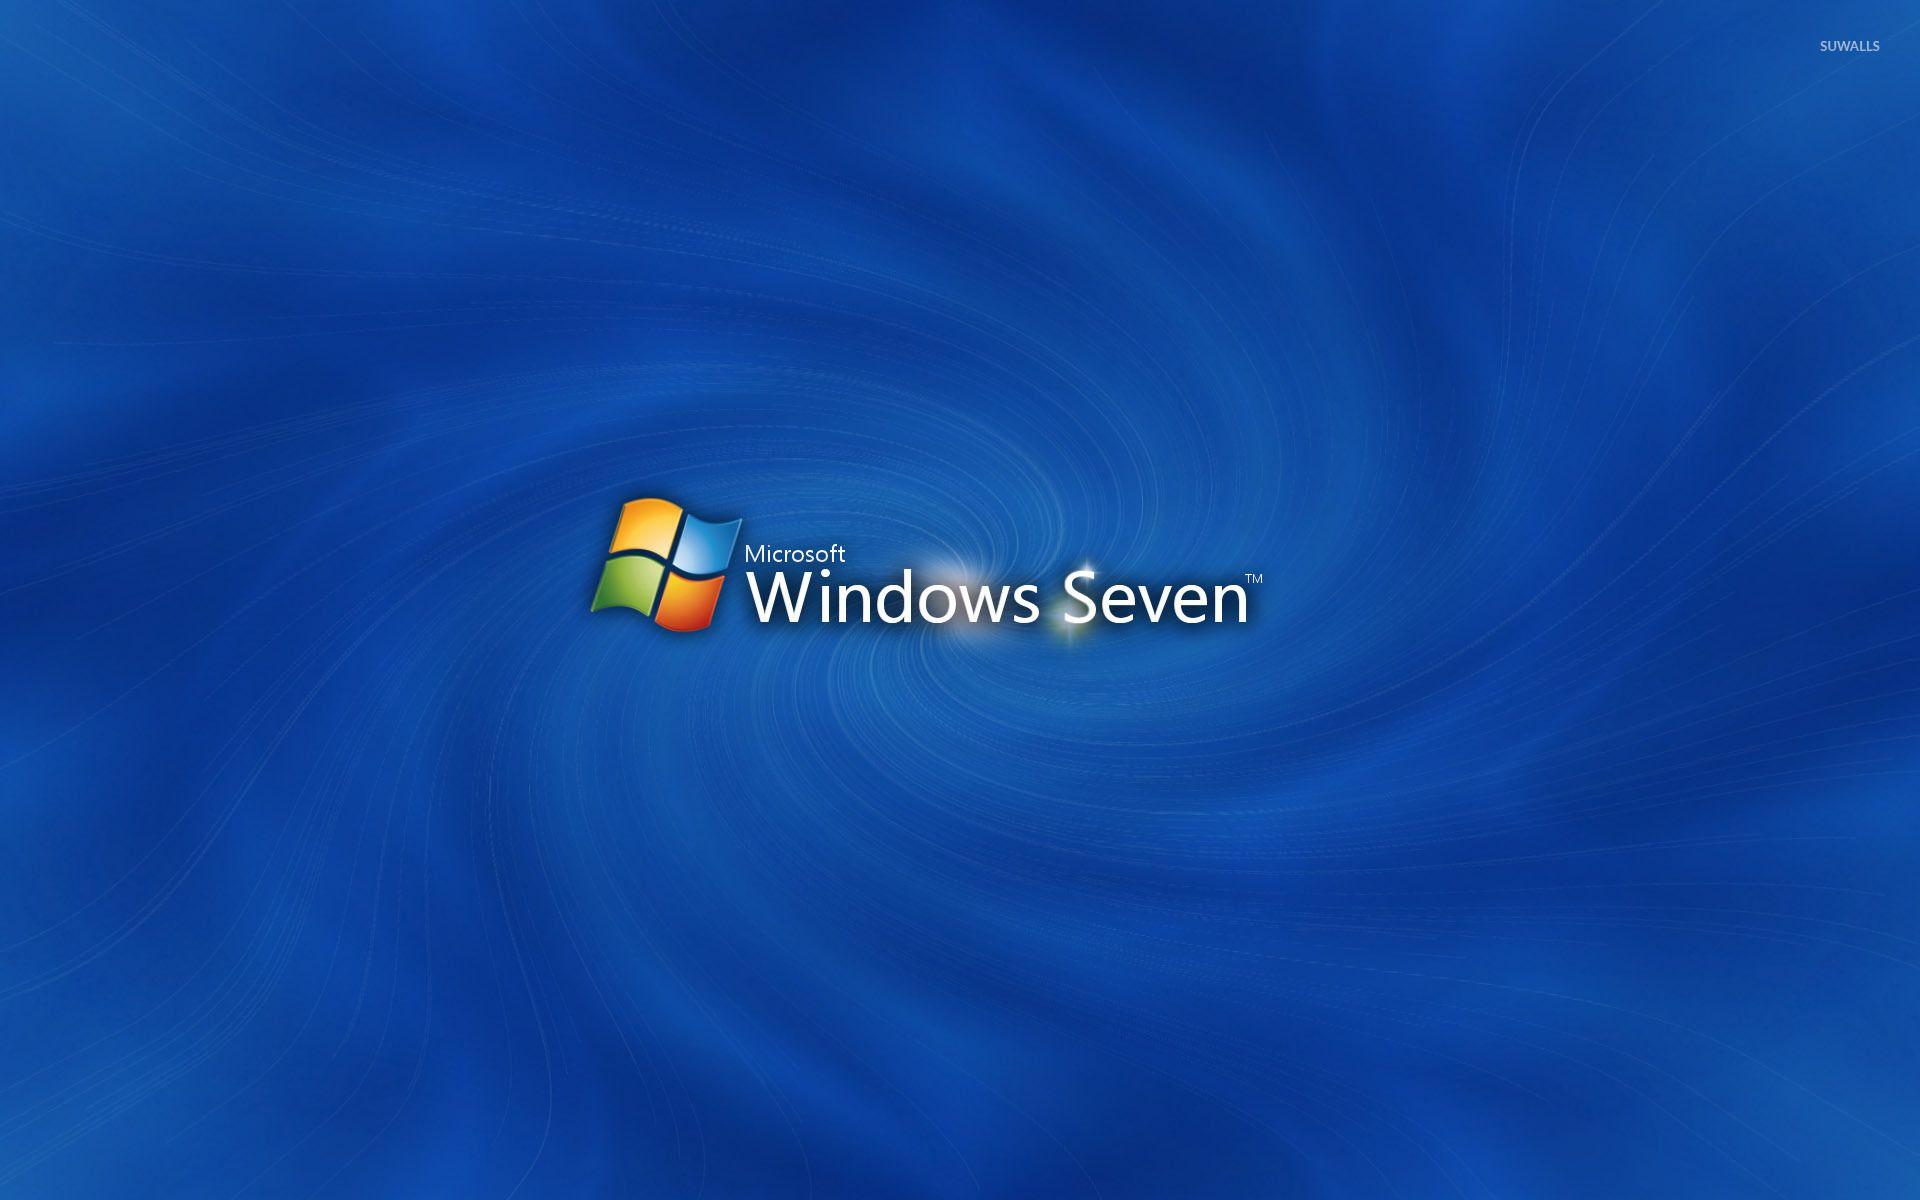 Windows 7 Professional Wallpapers - Top Free Windows 7 Professional